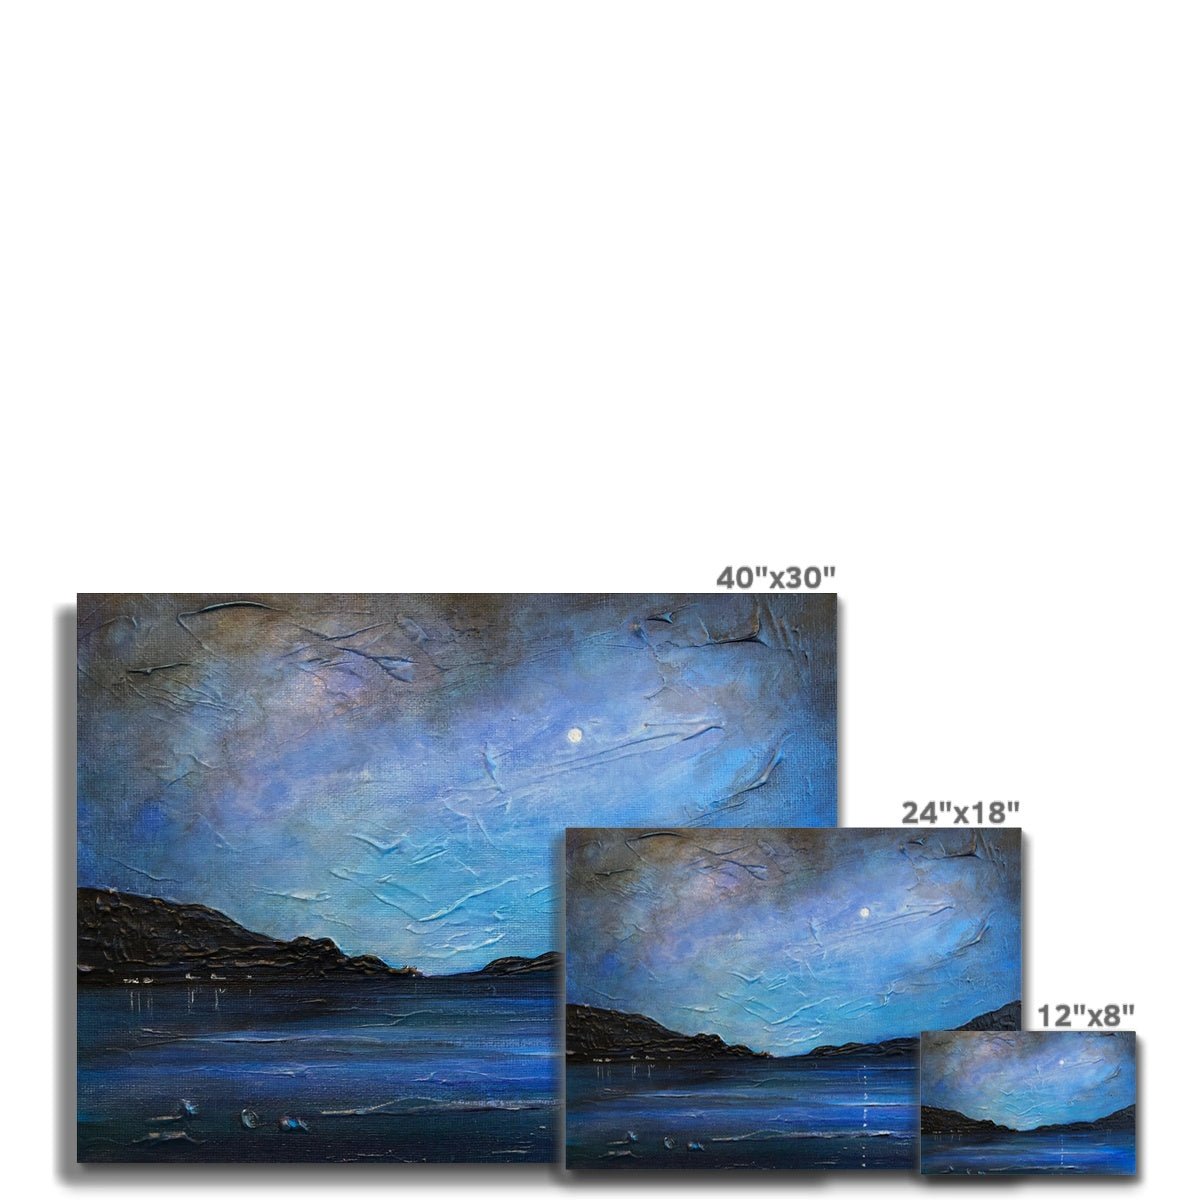 Loch Ness Moonlight Painting | Canvas From Scotland-Contemporary Stretched Canvas Prints-Scottish Lochs & Mountains Art Gallery-Paintings, Prints, Homeware, Art Gifts From Scotland By Scottish Artist Kevin Hunter